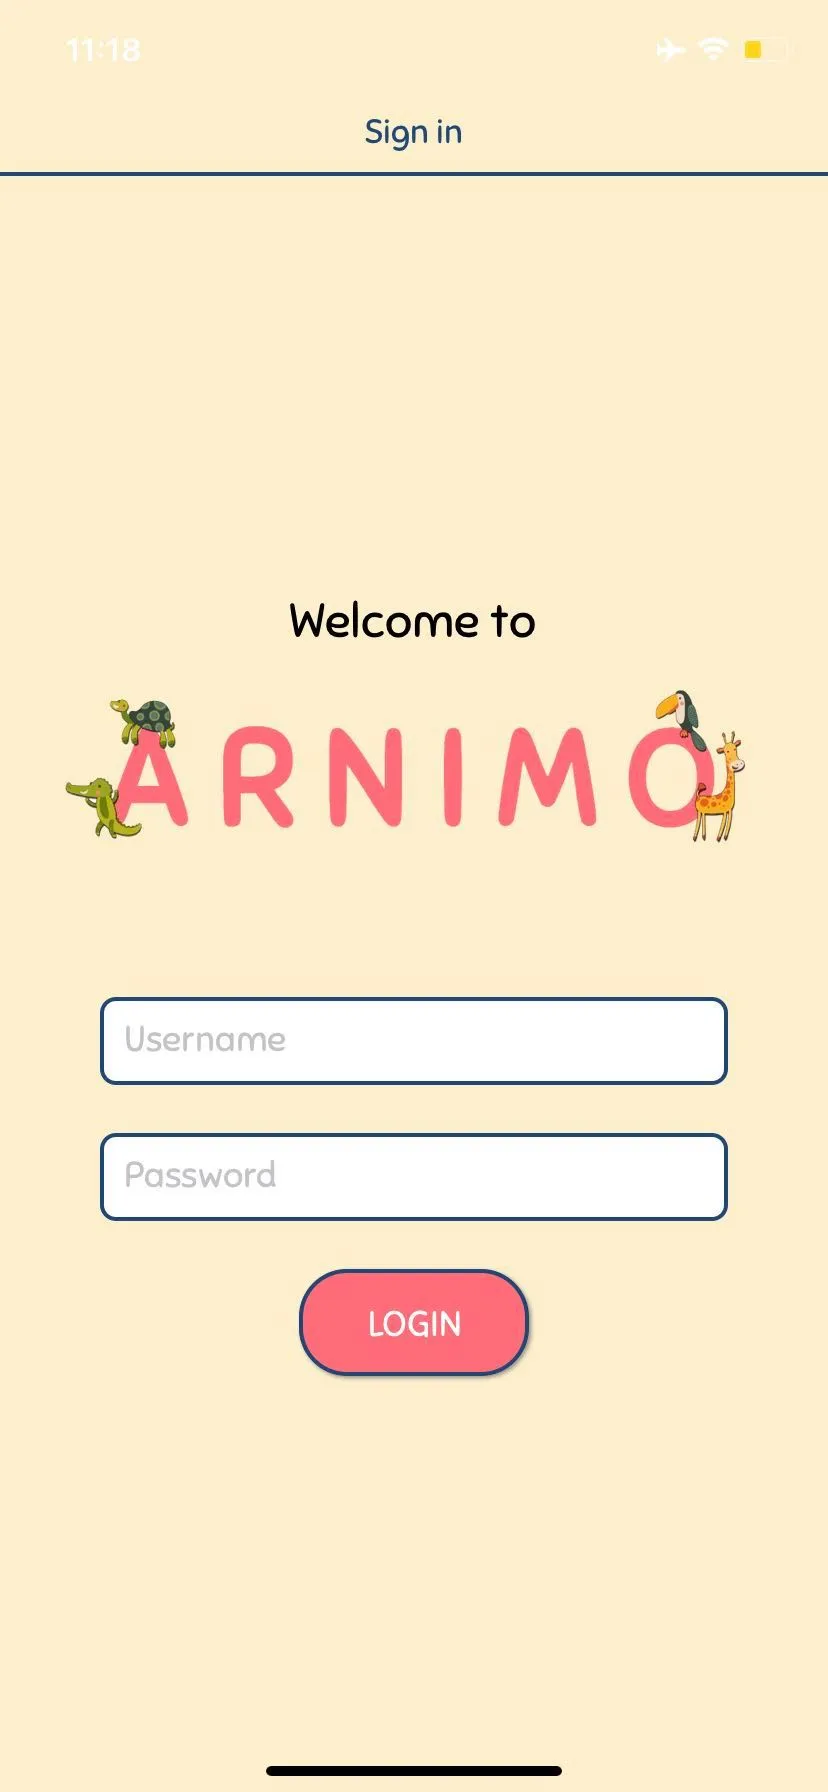 Our app login page.